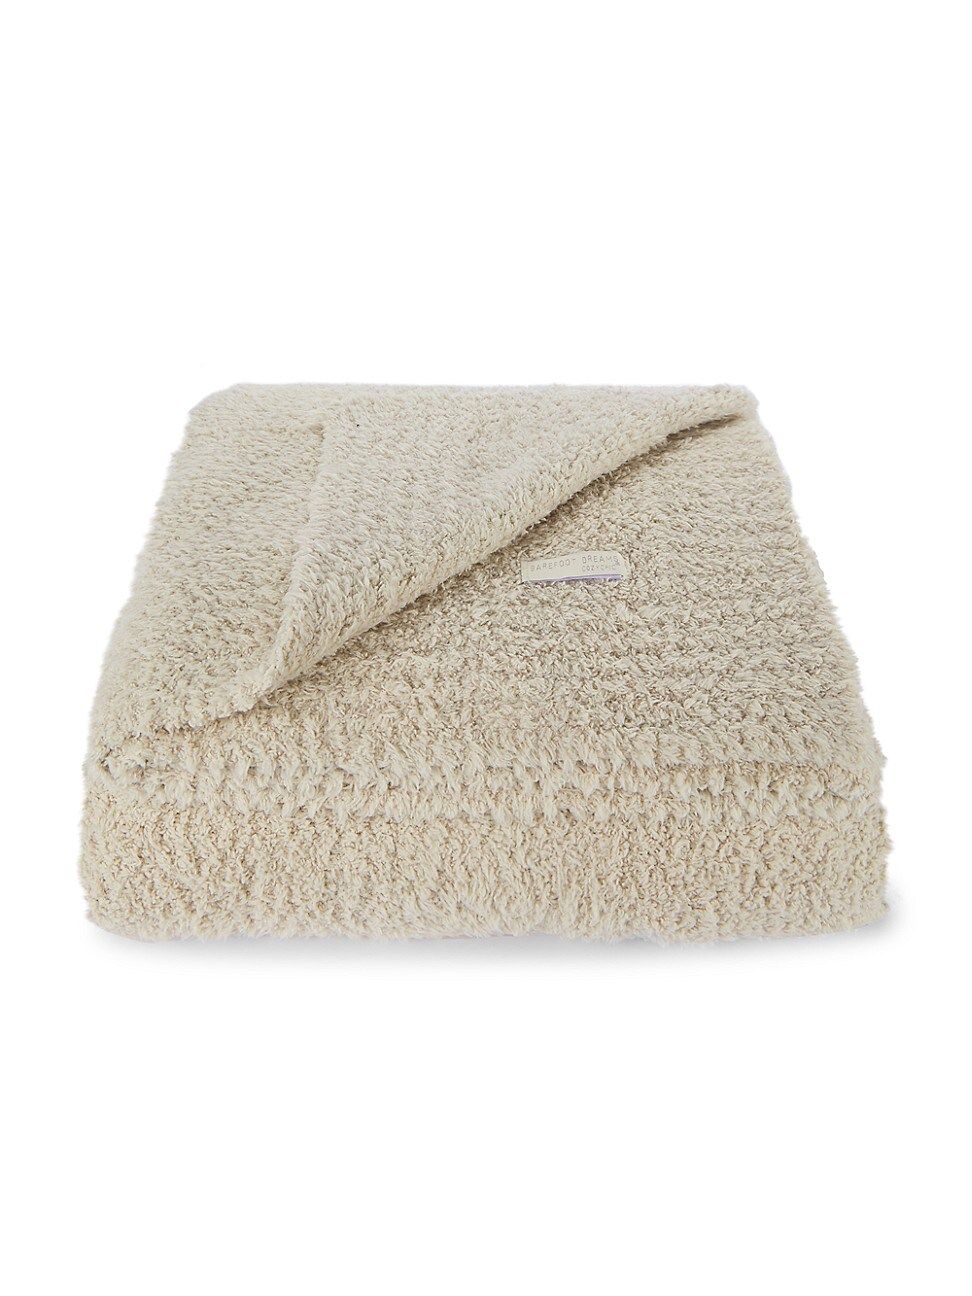 Barefoot Dreams Cozy Chic Throw - Stone | Saks Fifth Avenue